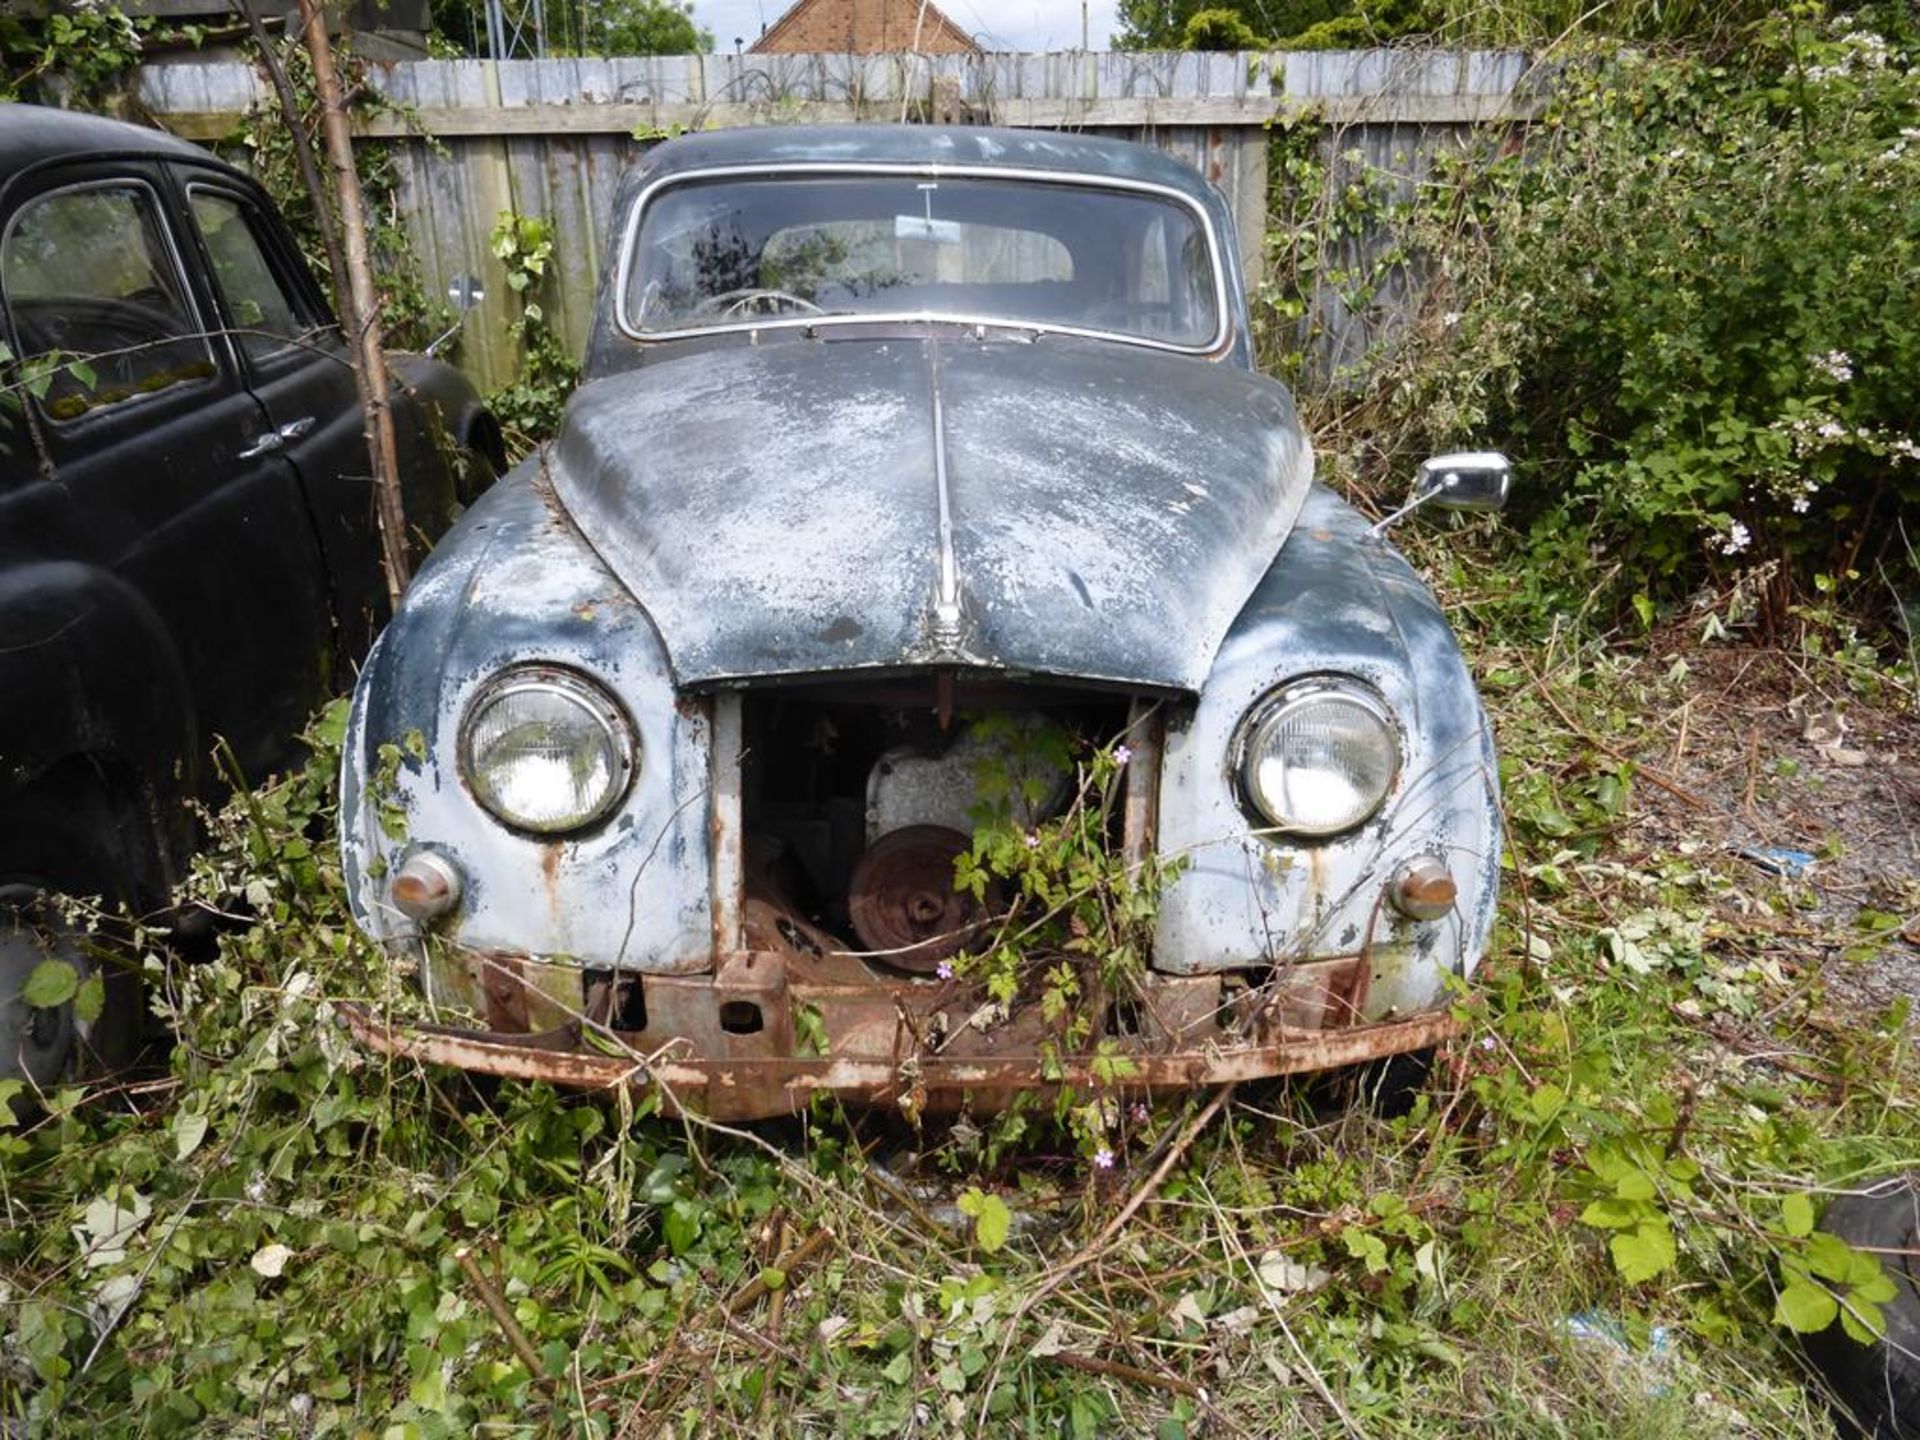 A Rover P4 (in need of restoration) - Image 6 of 8